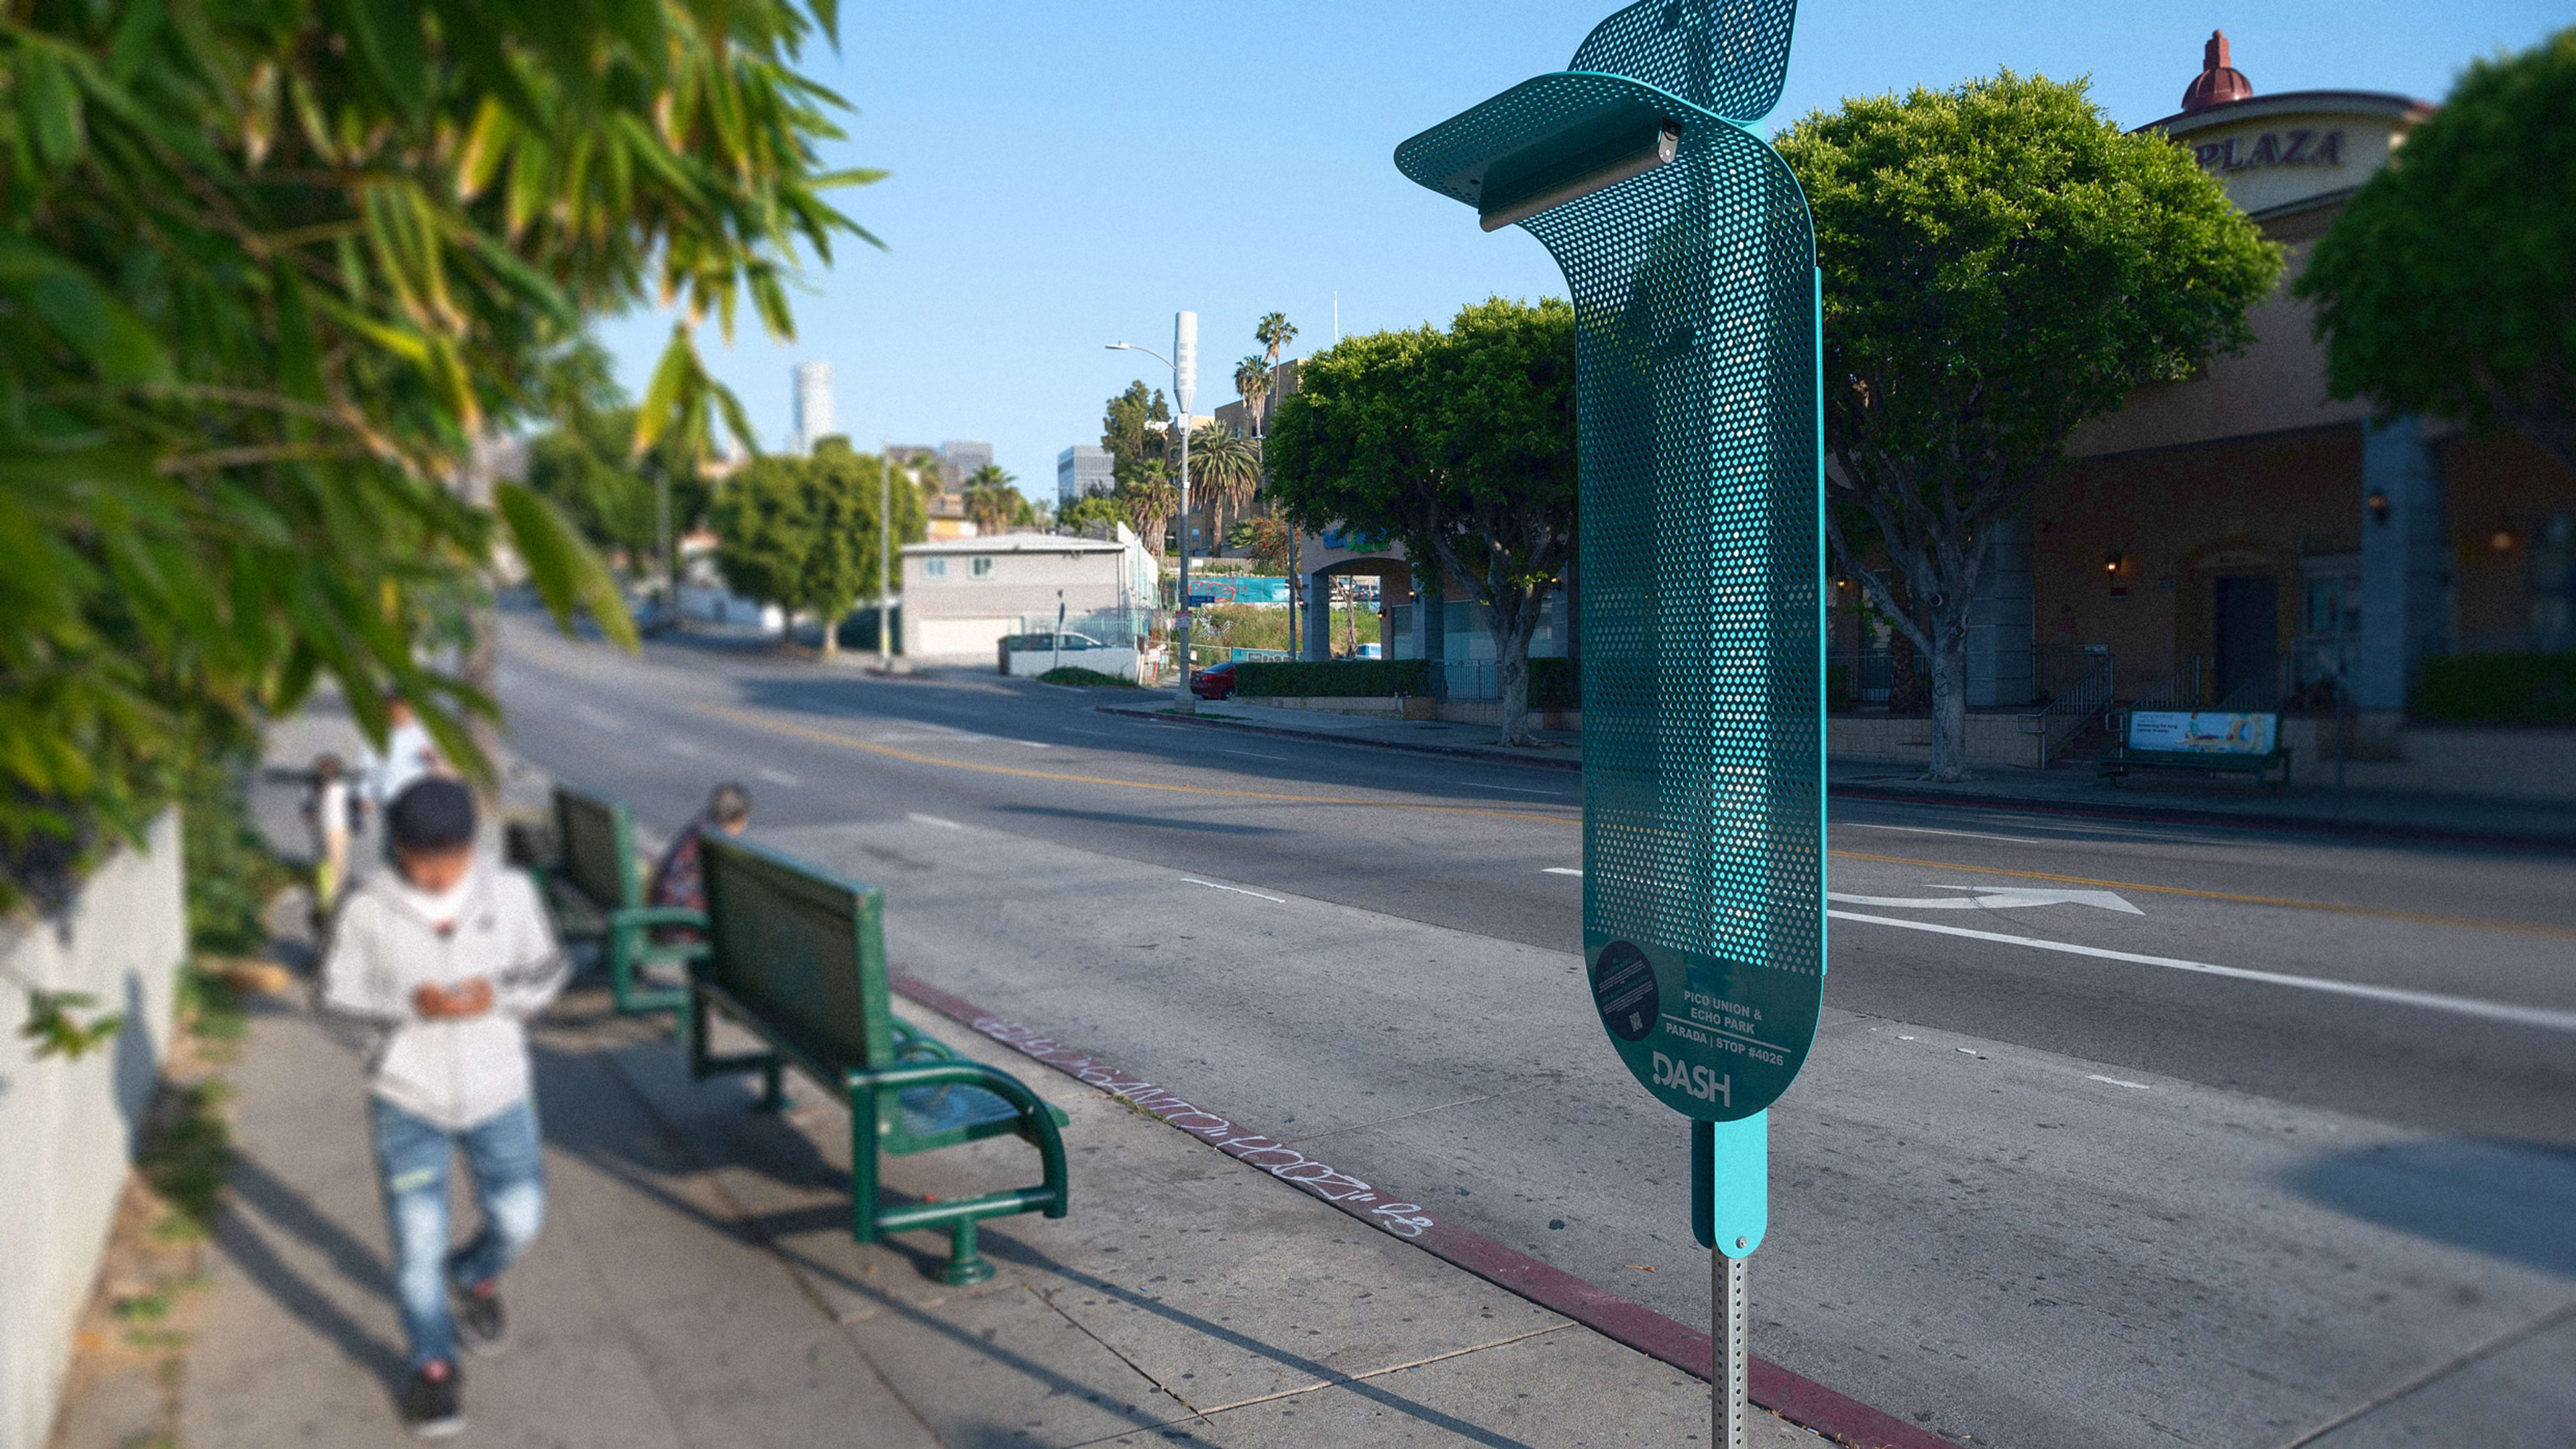 How (not) to design a bus stop